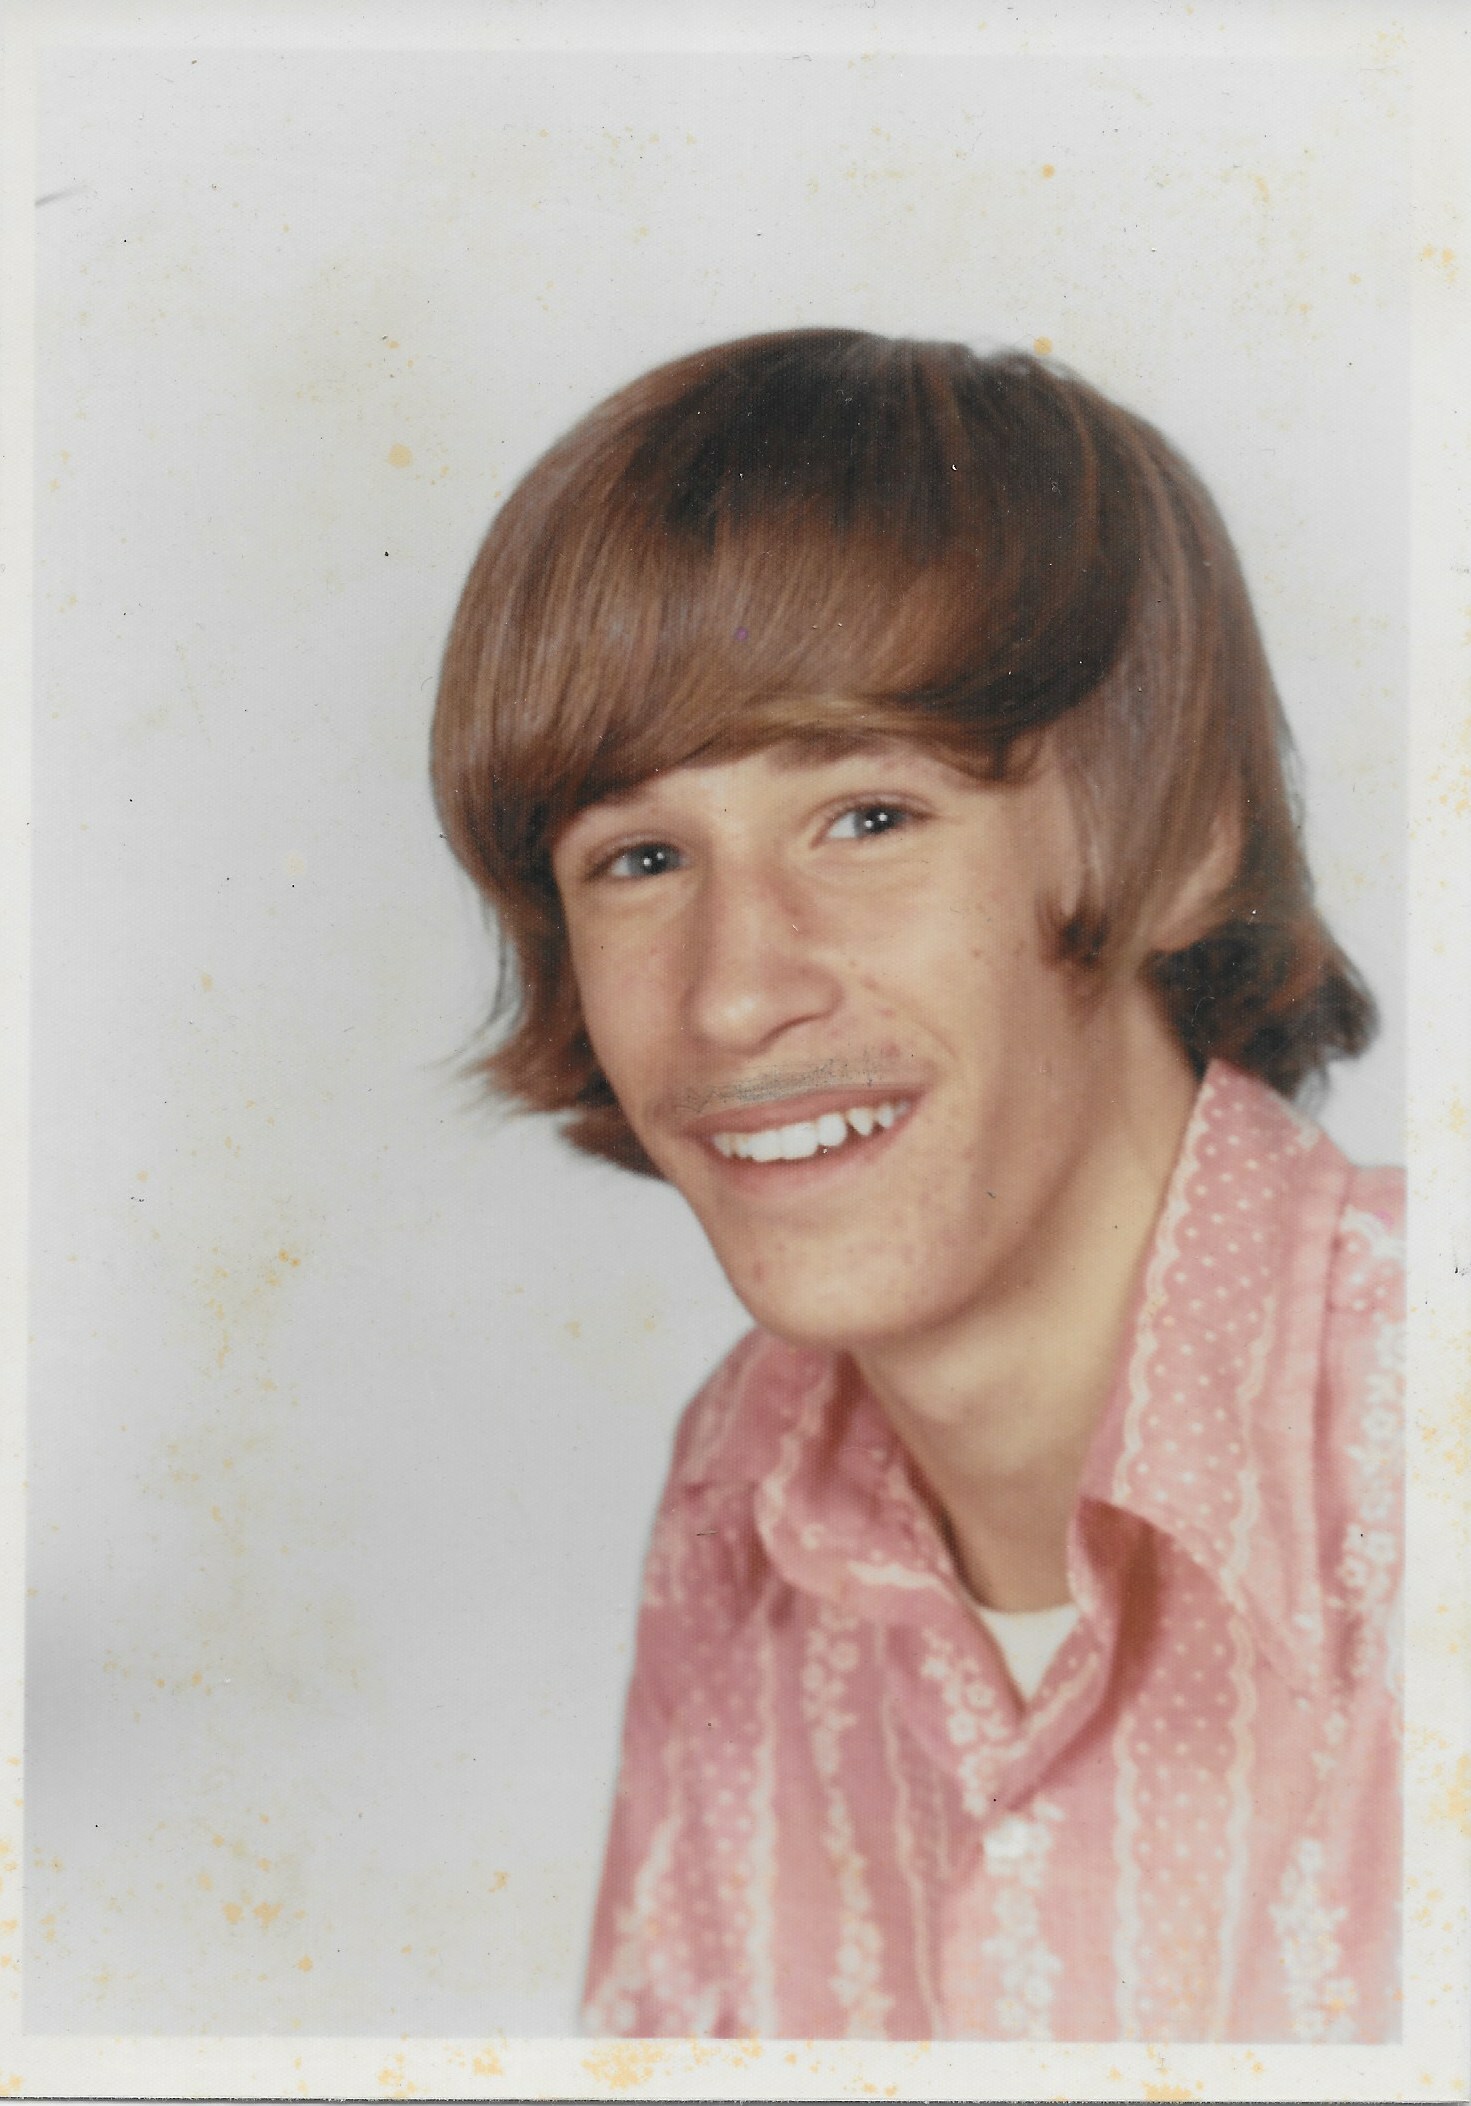 East Hampton Middle School yearbook photo of Geoff Gehman in 1971 when he was 13. Note the long hair, curly sideburns and floral shirt — post-hippie giveaways.